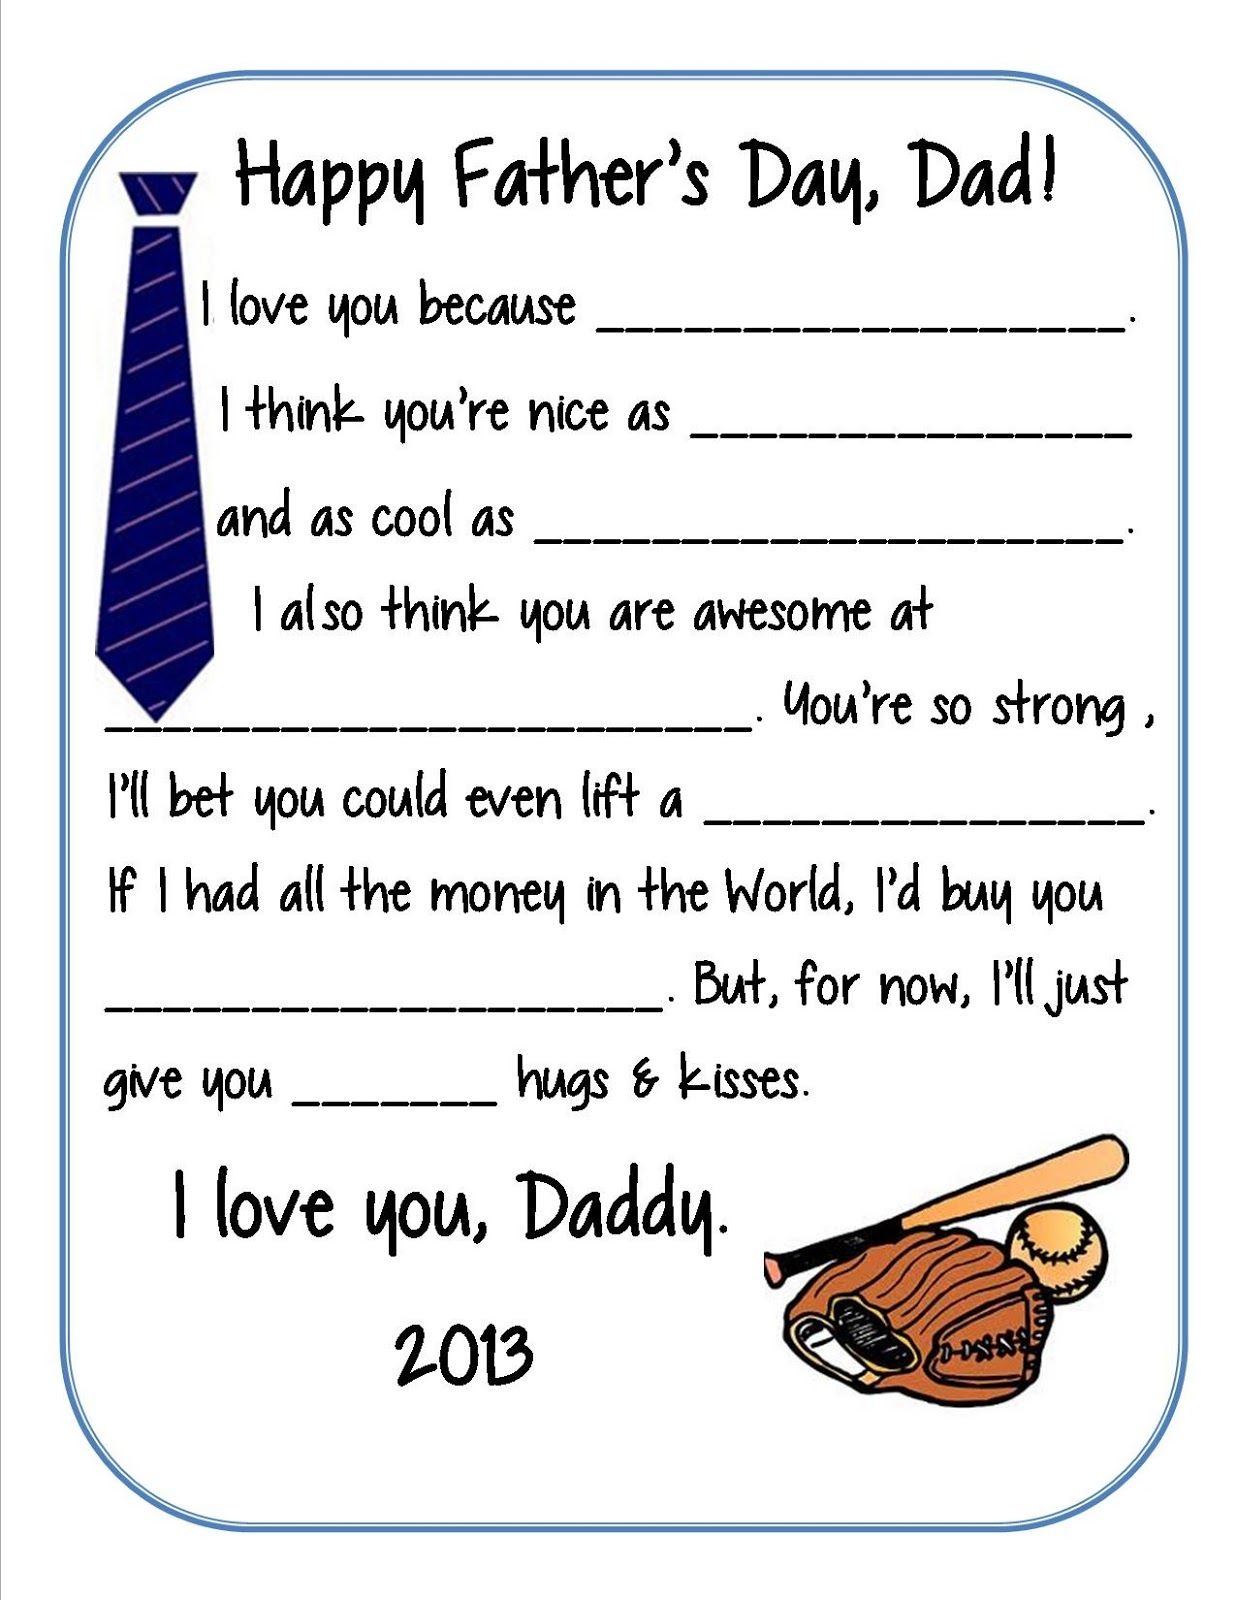 6 Easy Diy Father&amp;#039;s Day Gift Ideas | I ❤ Dad Crafts | Father&amp;#039;s Day - Free Printable Fathers Day Cards For Preschoolers